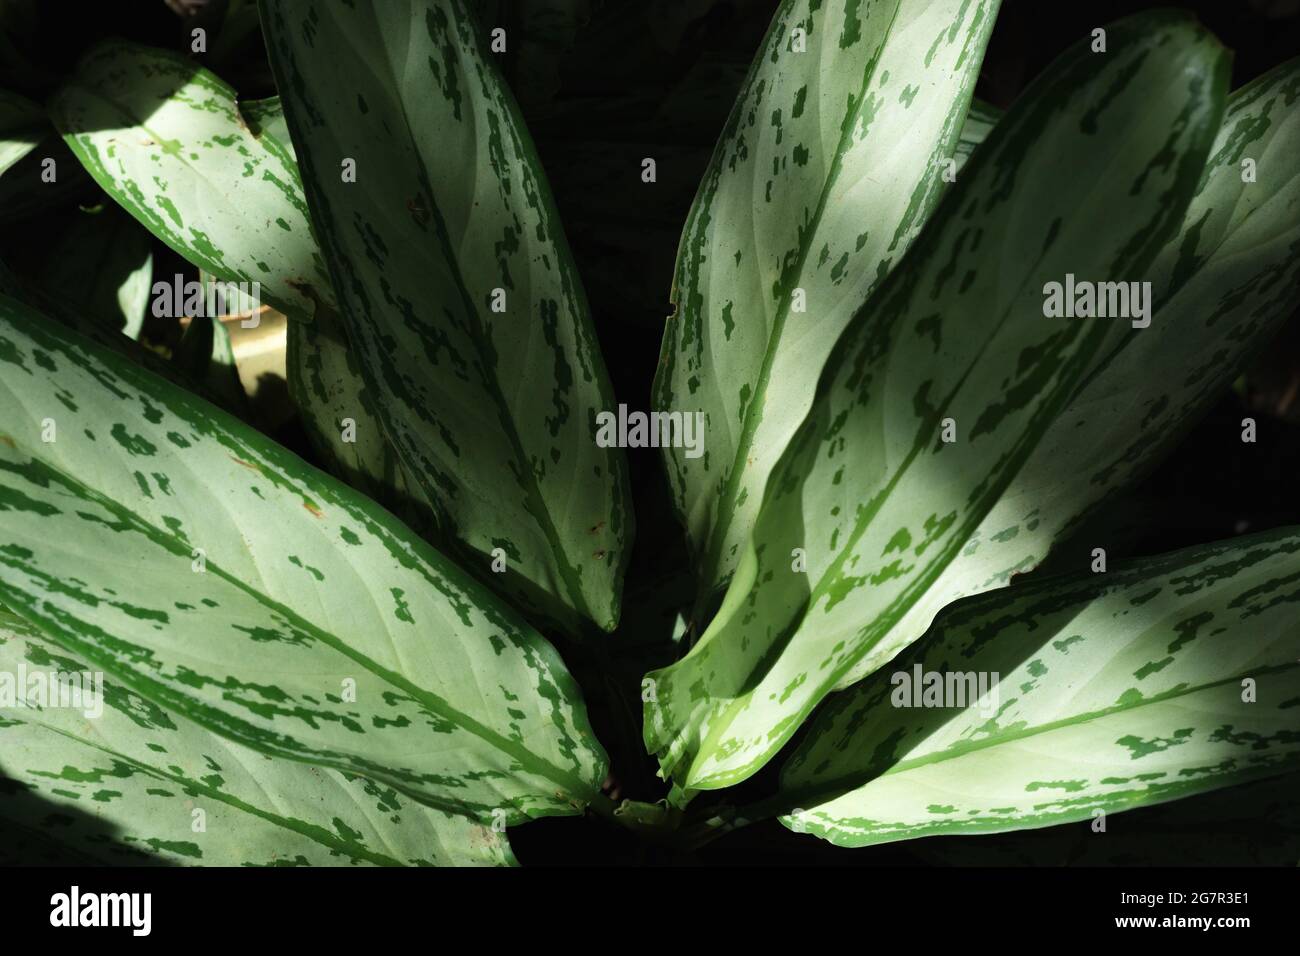 Close up of nature green aglaonema chinese evergreen leaves exposed with sunlight with dark background for wallpaper Stock Photo